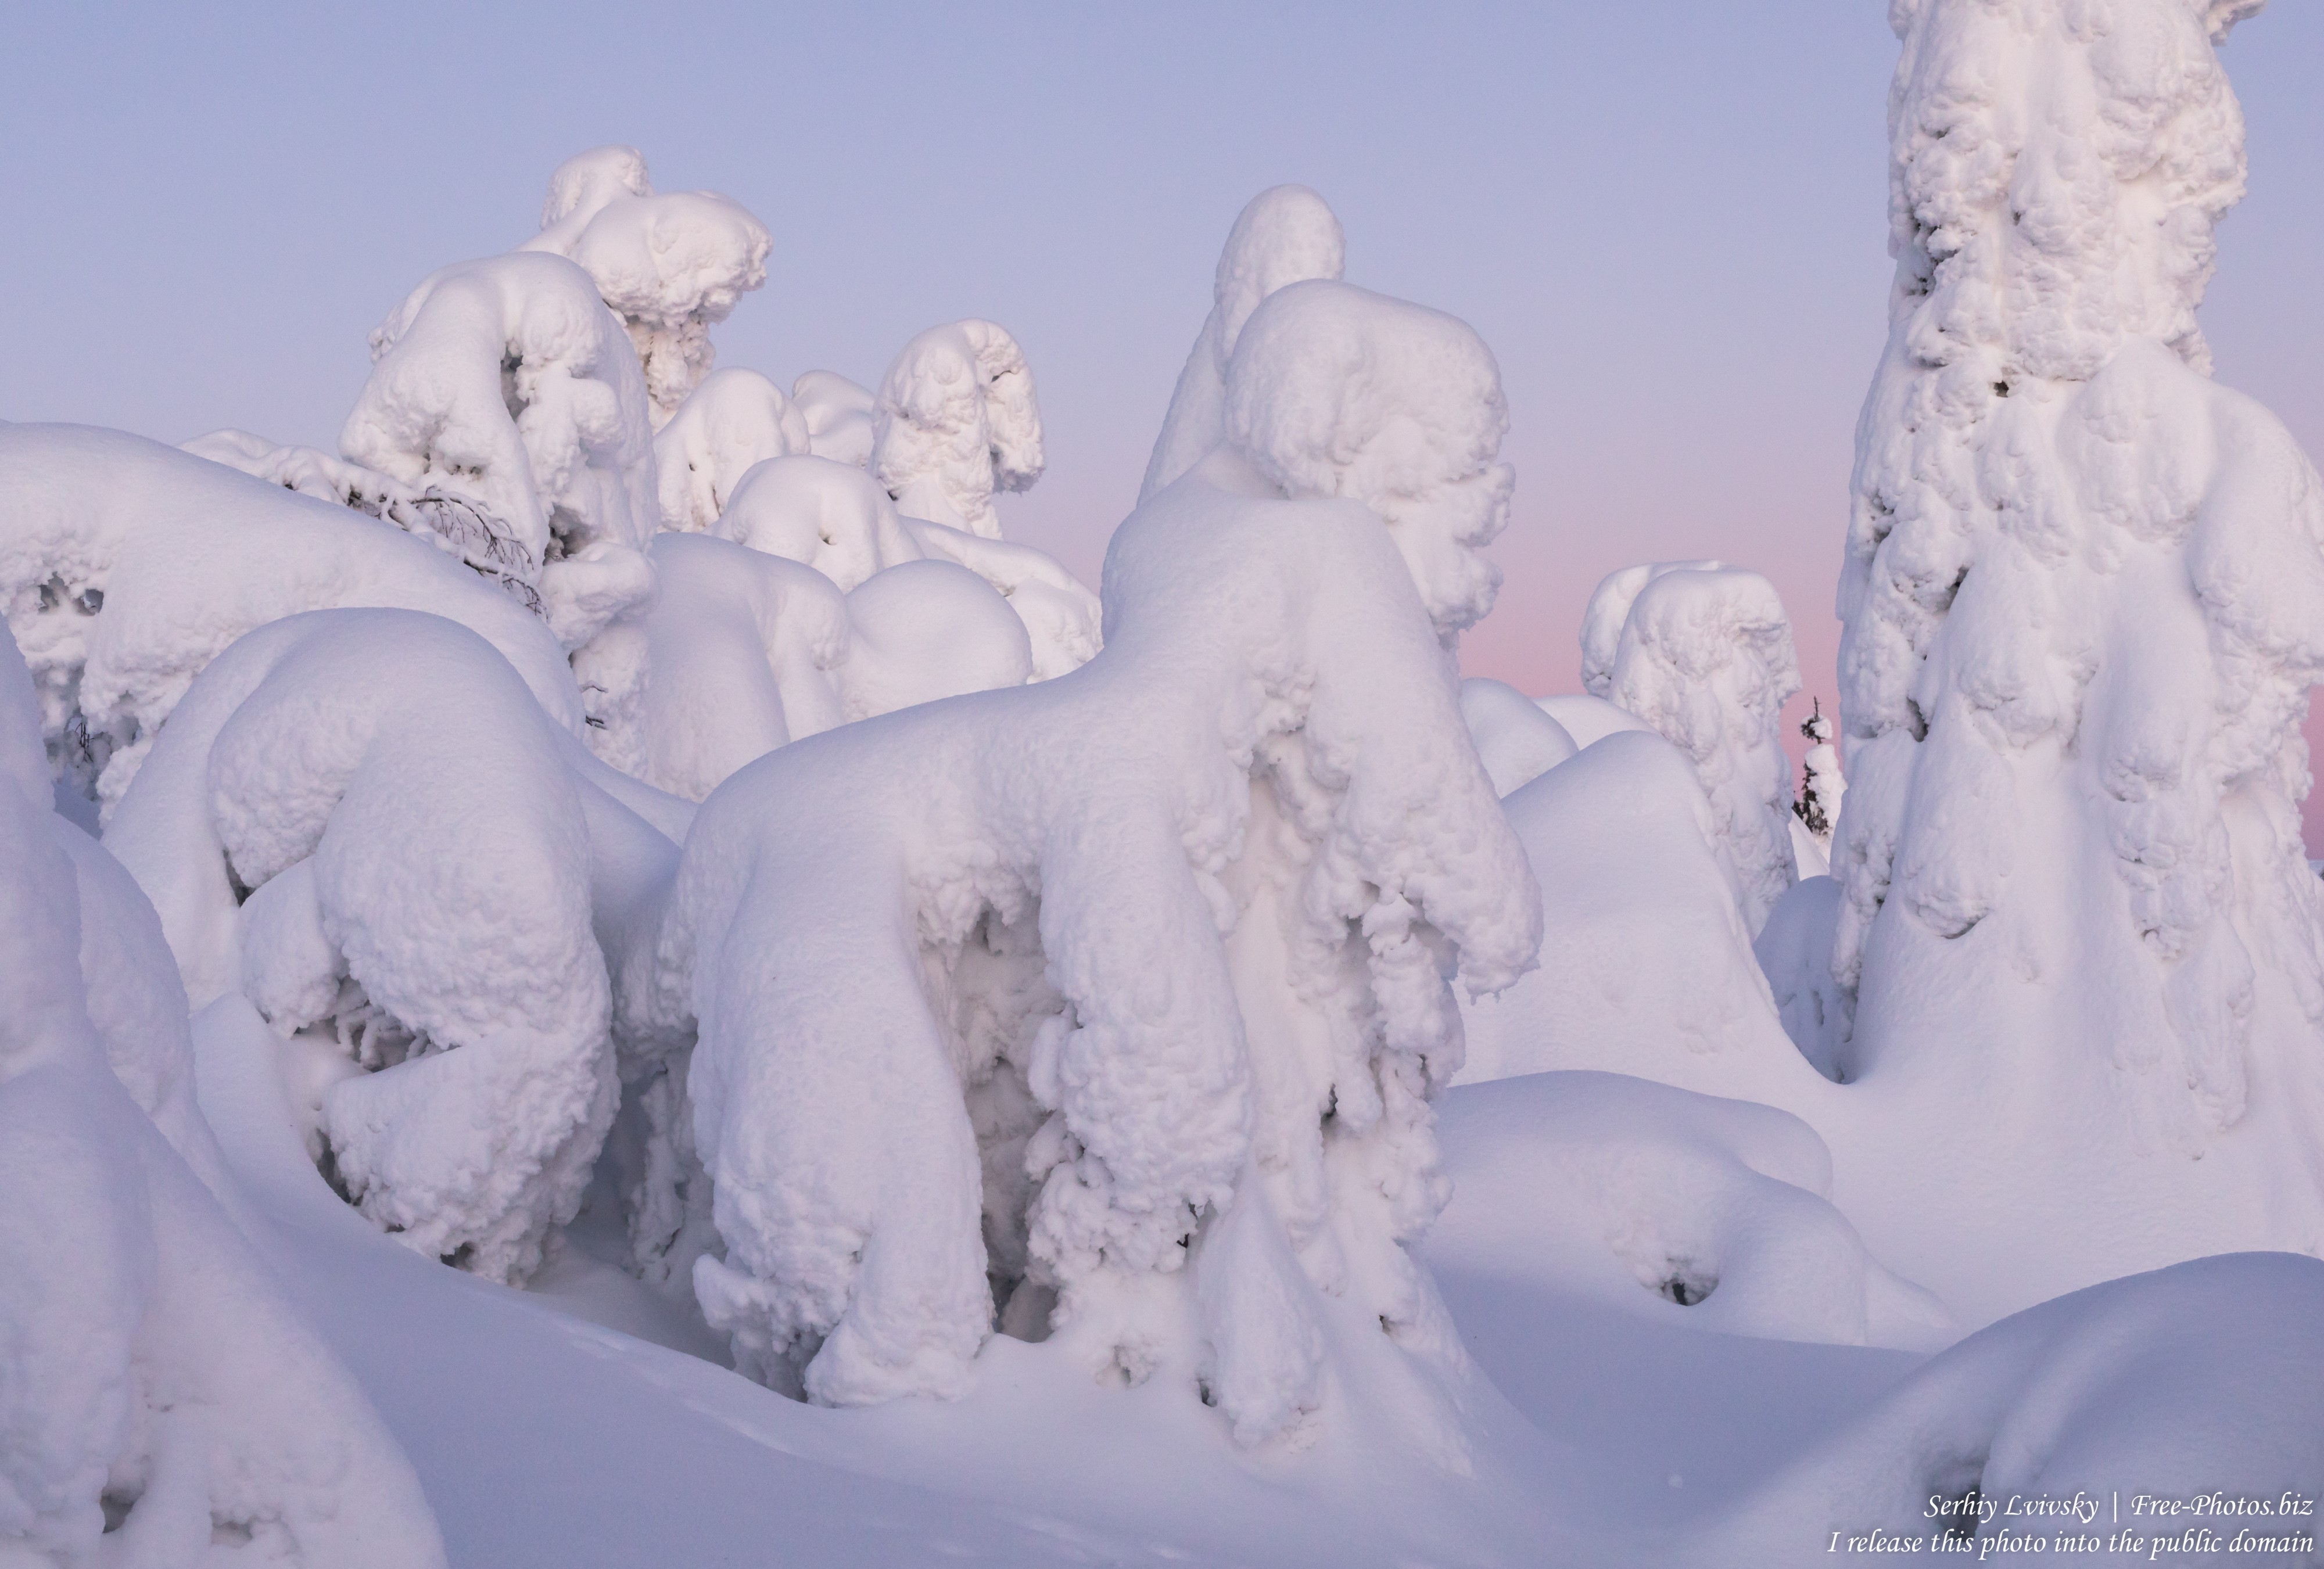 Valtavaara, Finland, photographed in January 2020 by Serhiy Lvivsky, picture 7